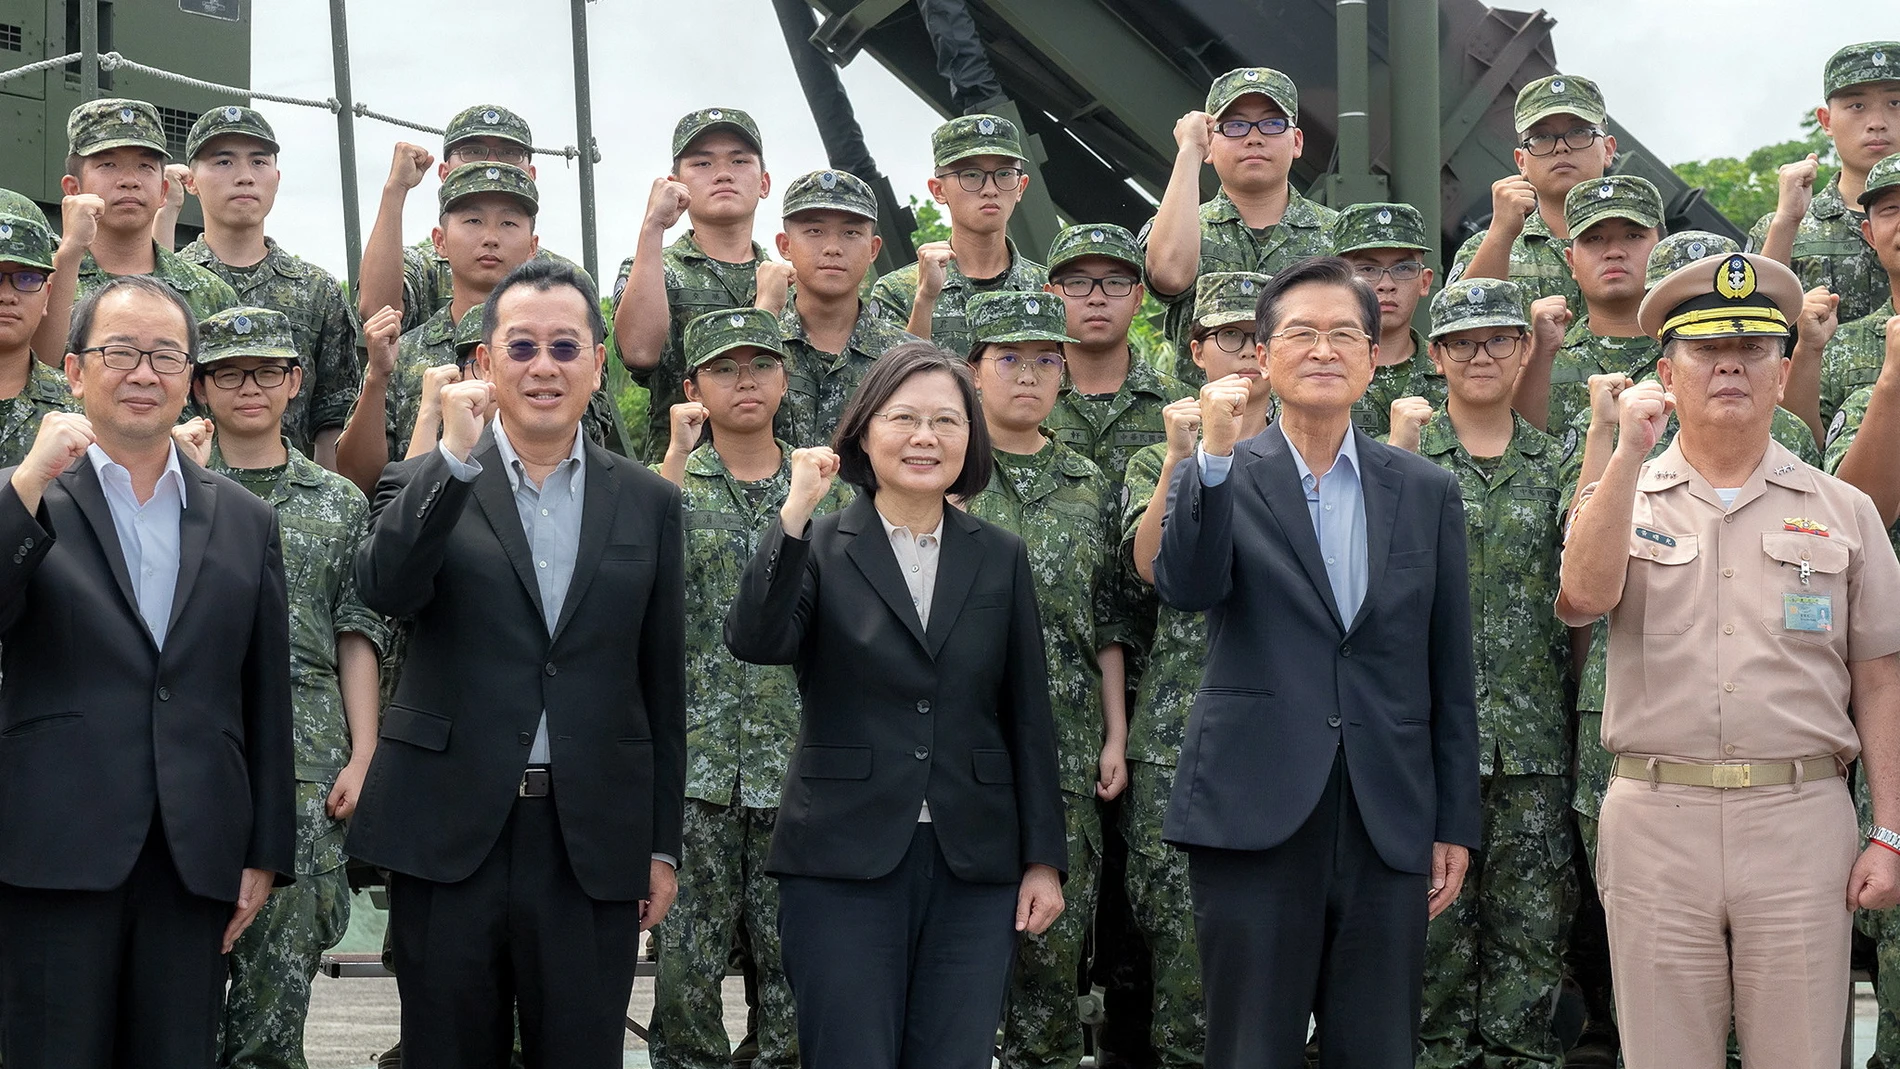 Taiwan president visits missile base amid tension with China